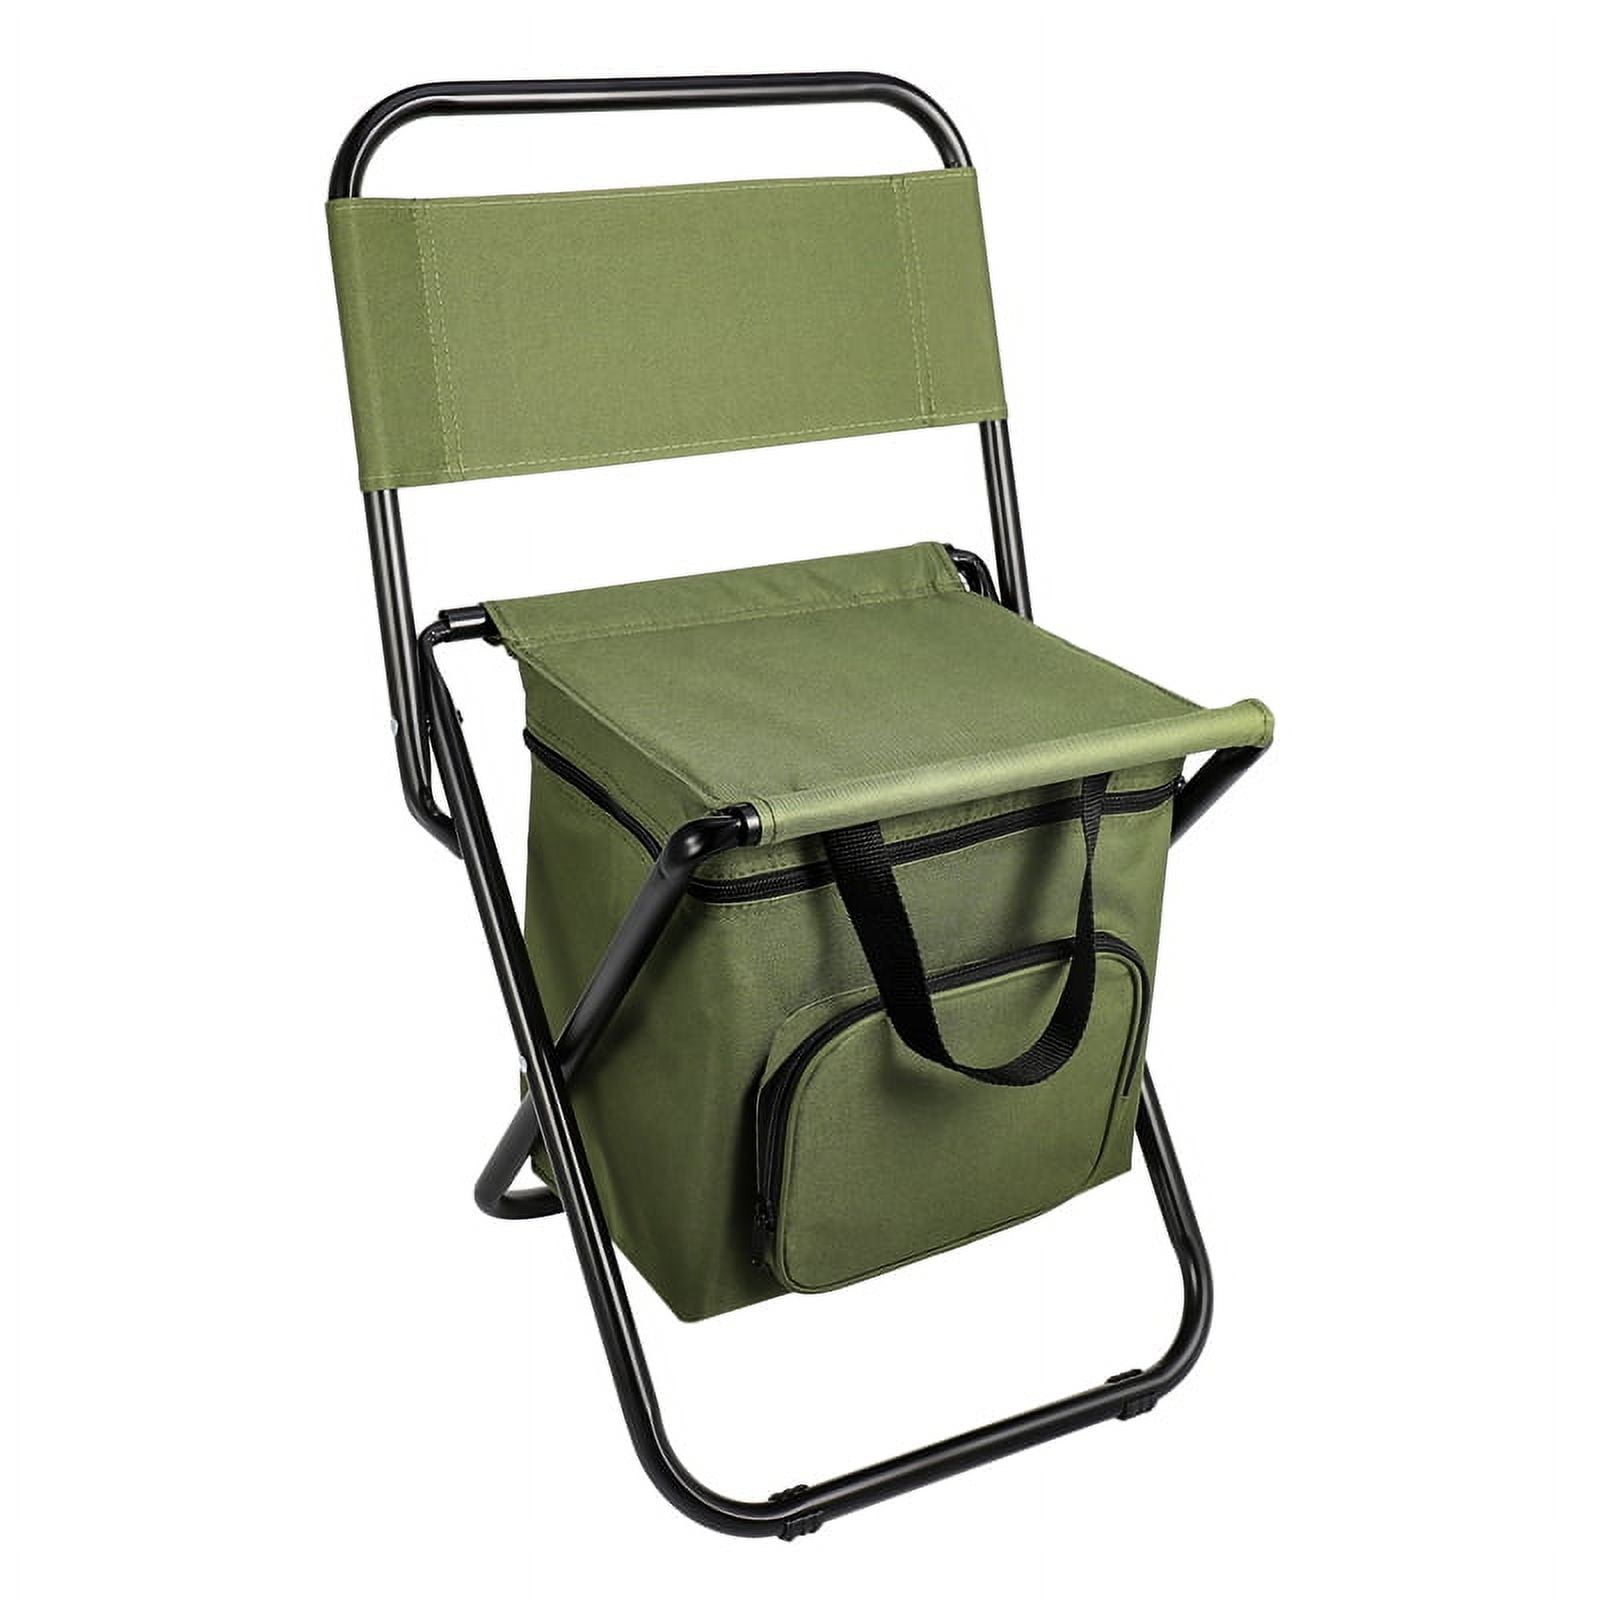 JUNDALIE 3-in-1 Fishing Camping Chair Stool with Carry Bag